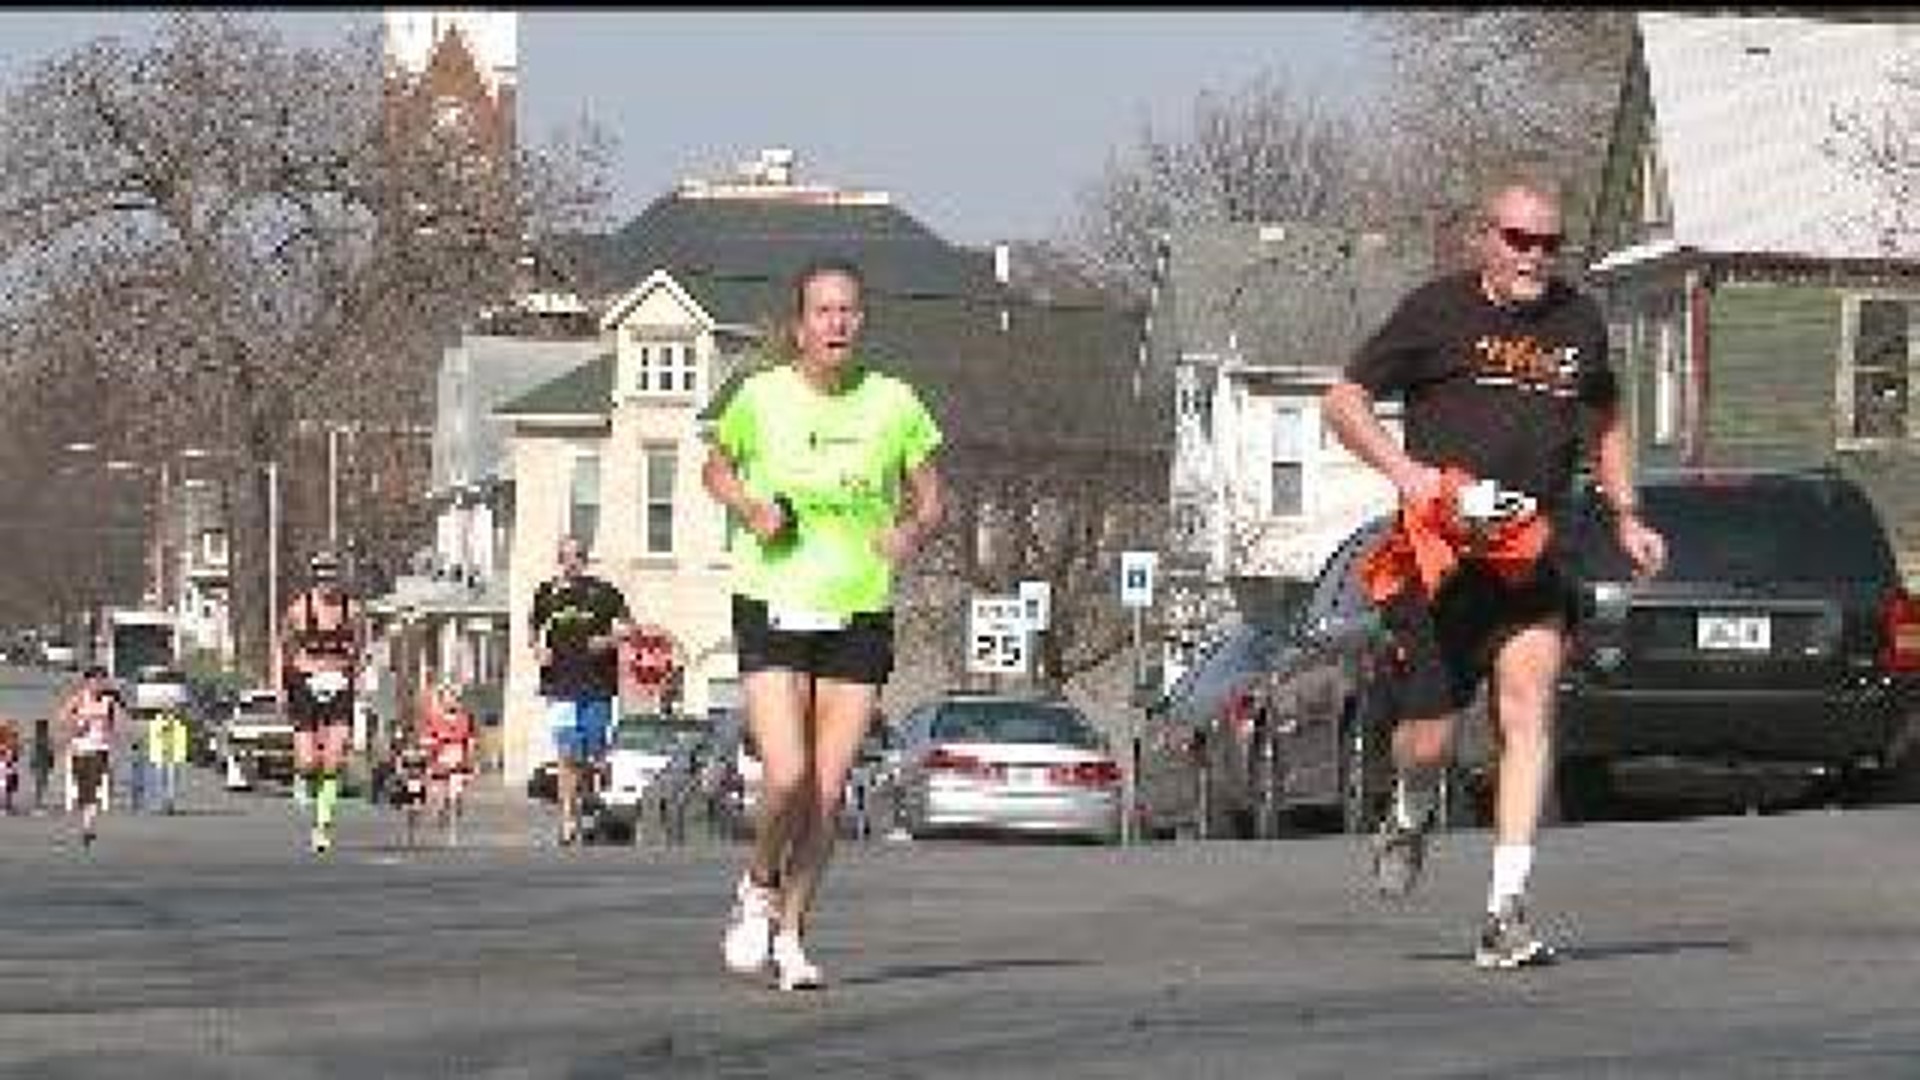 Project Renewal hosts 10th annual race